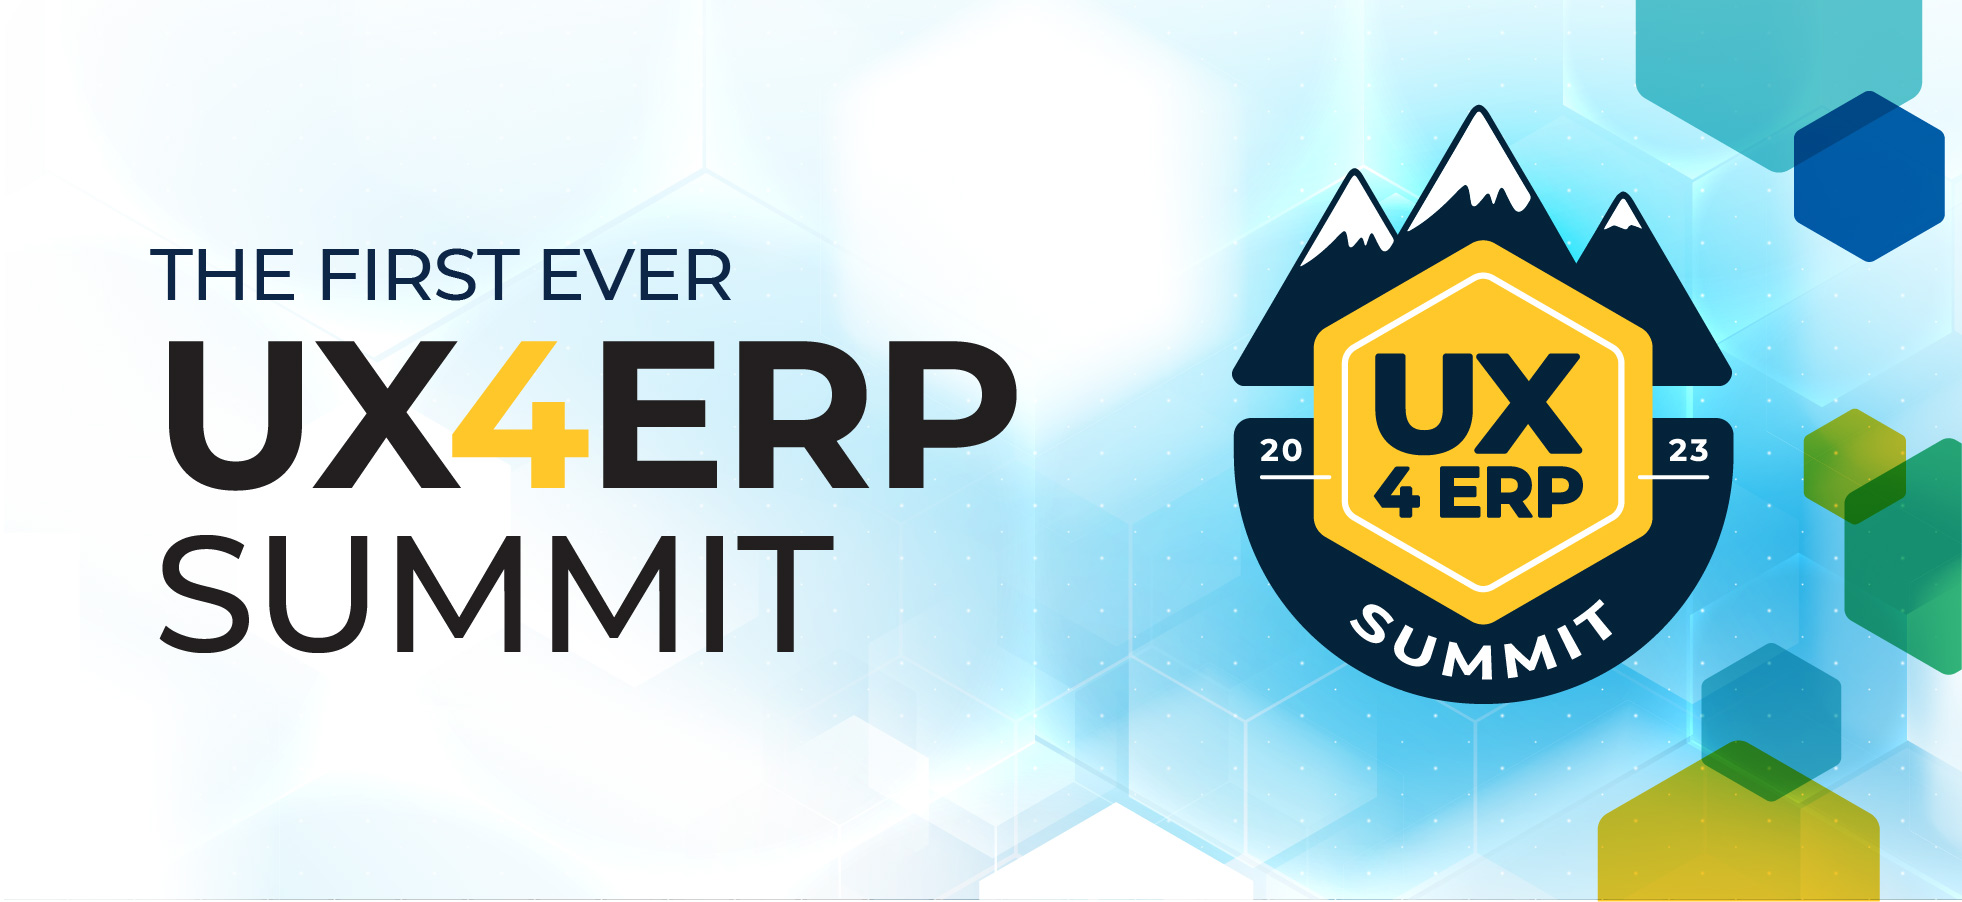 The first ever UX4ERP Summit